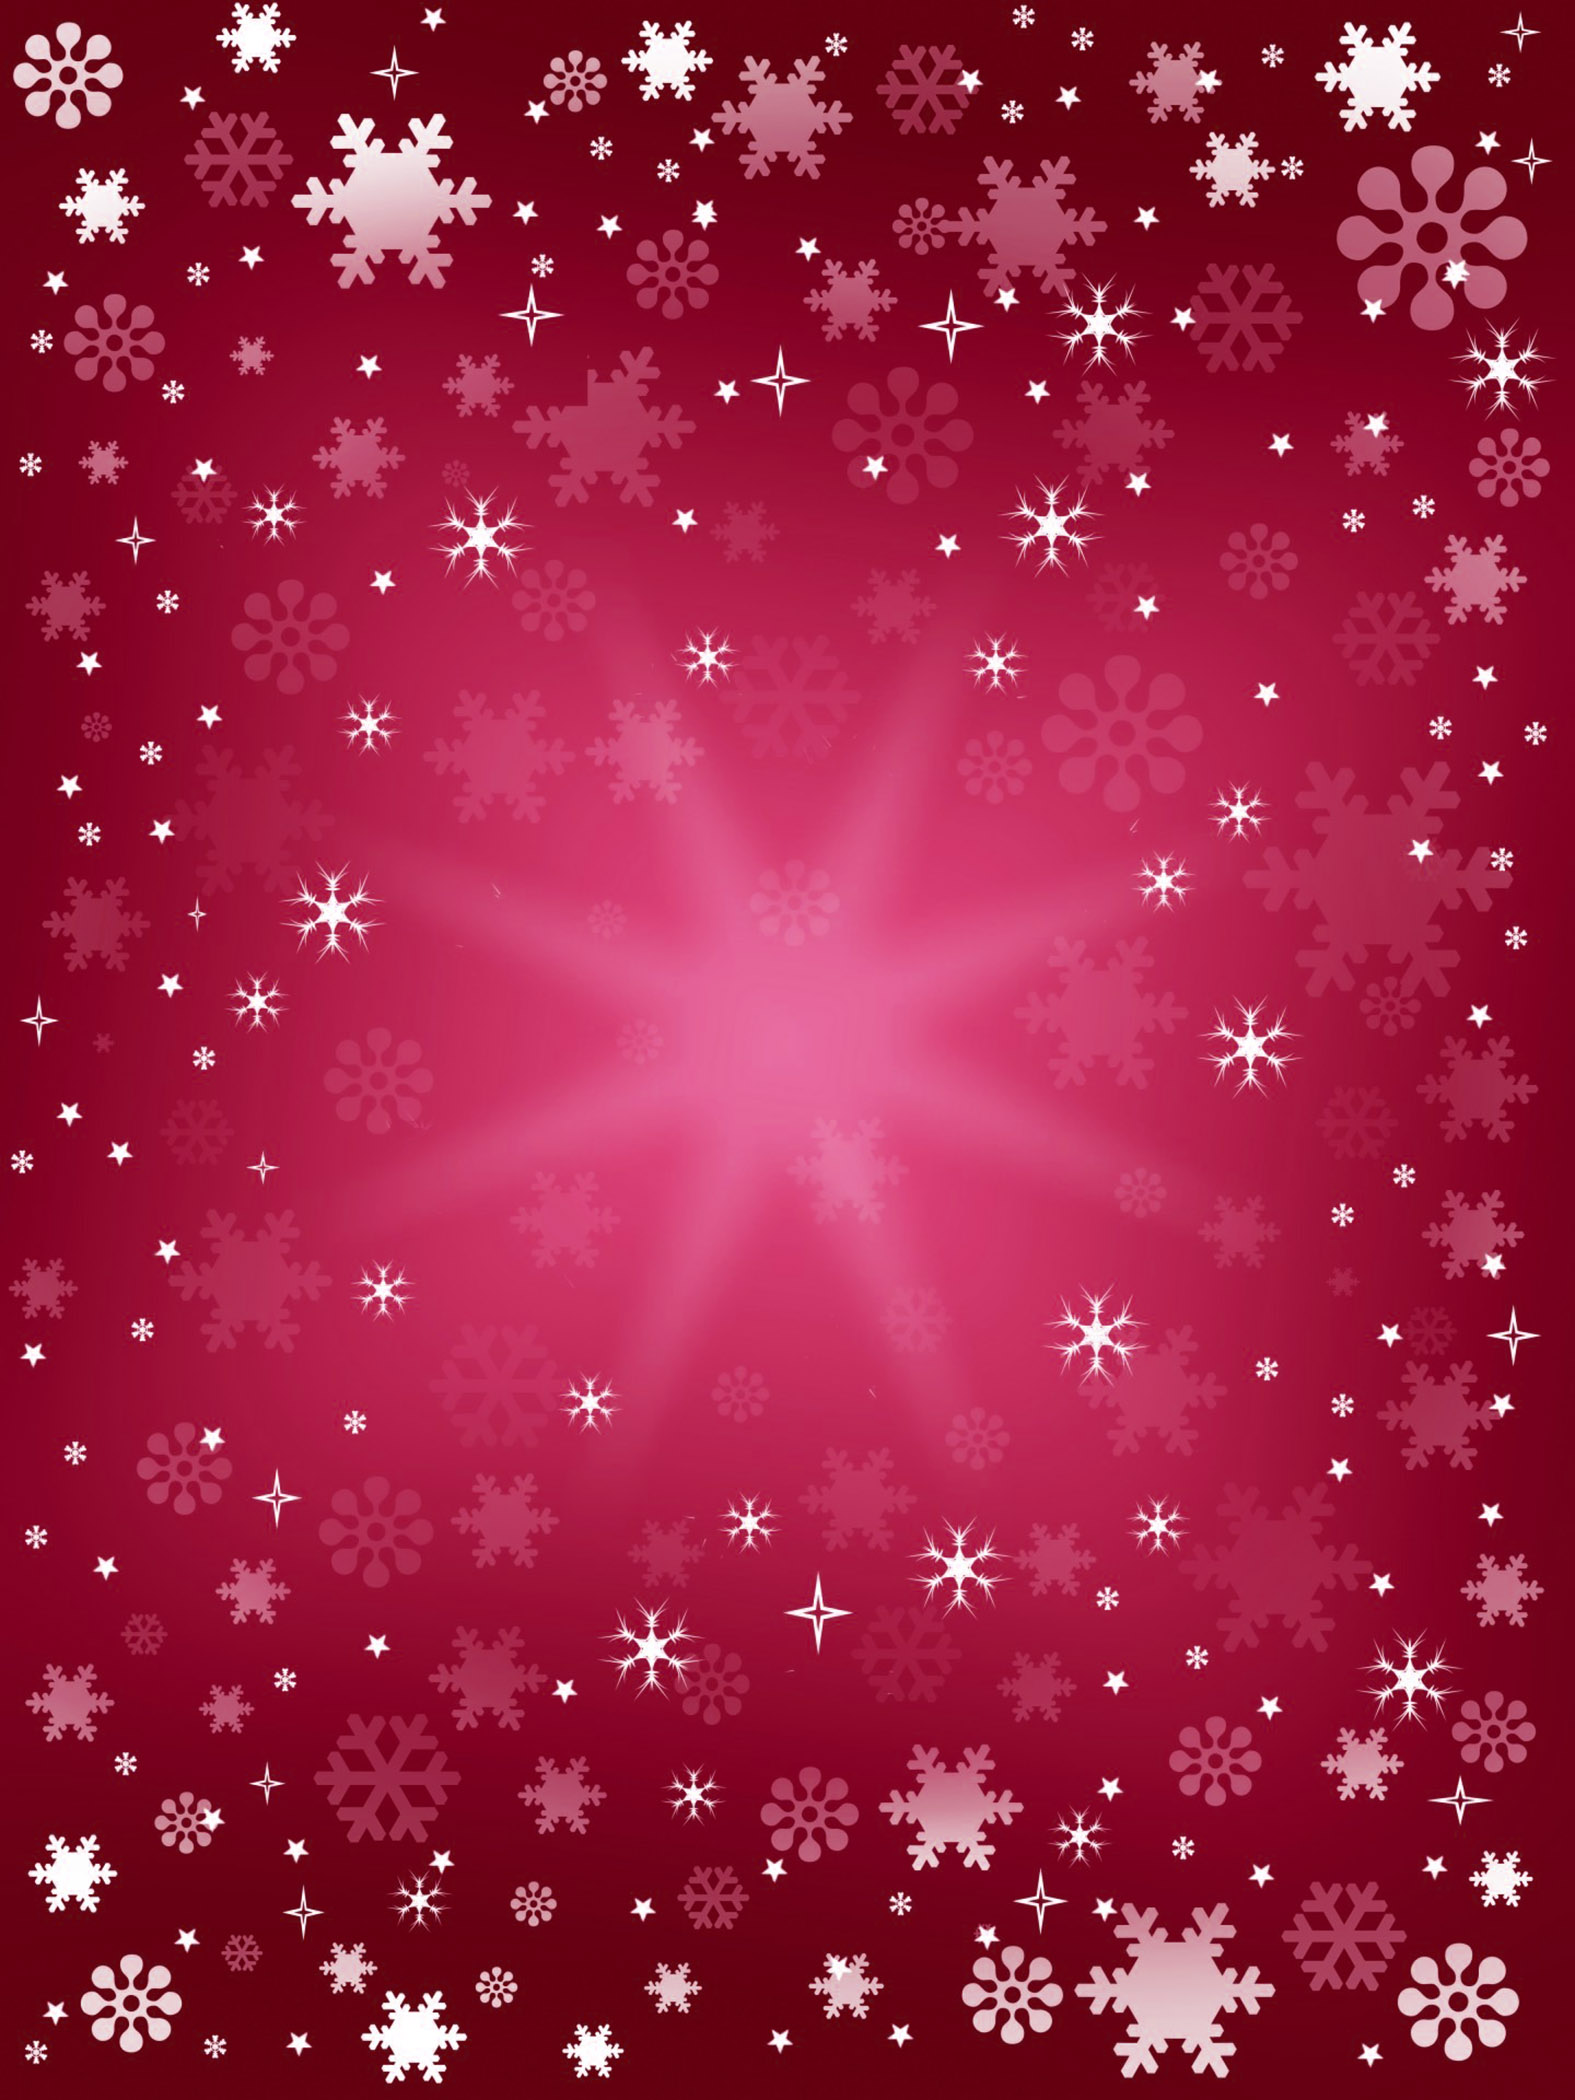 snow red christmas background | Free Textures, Photos & Background Images